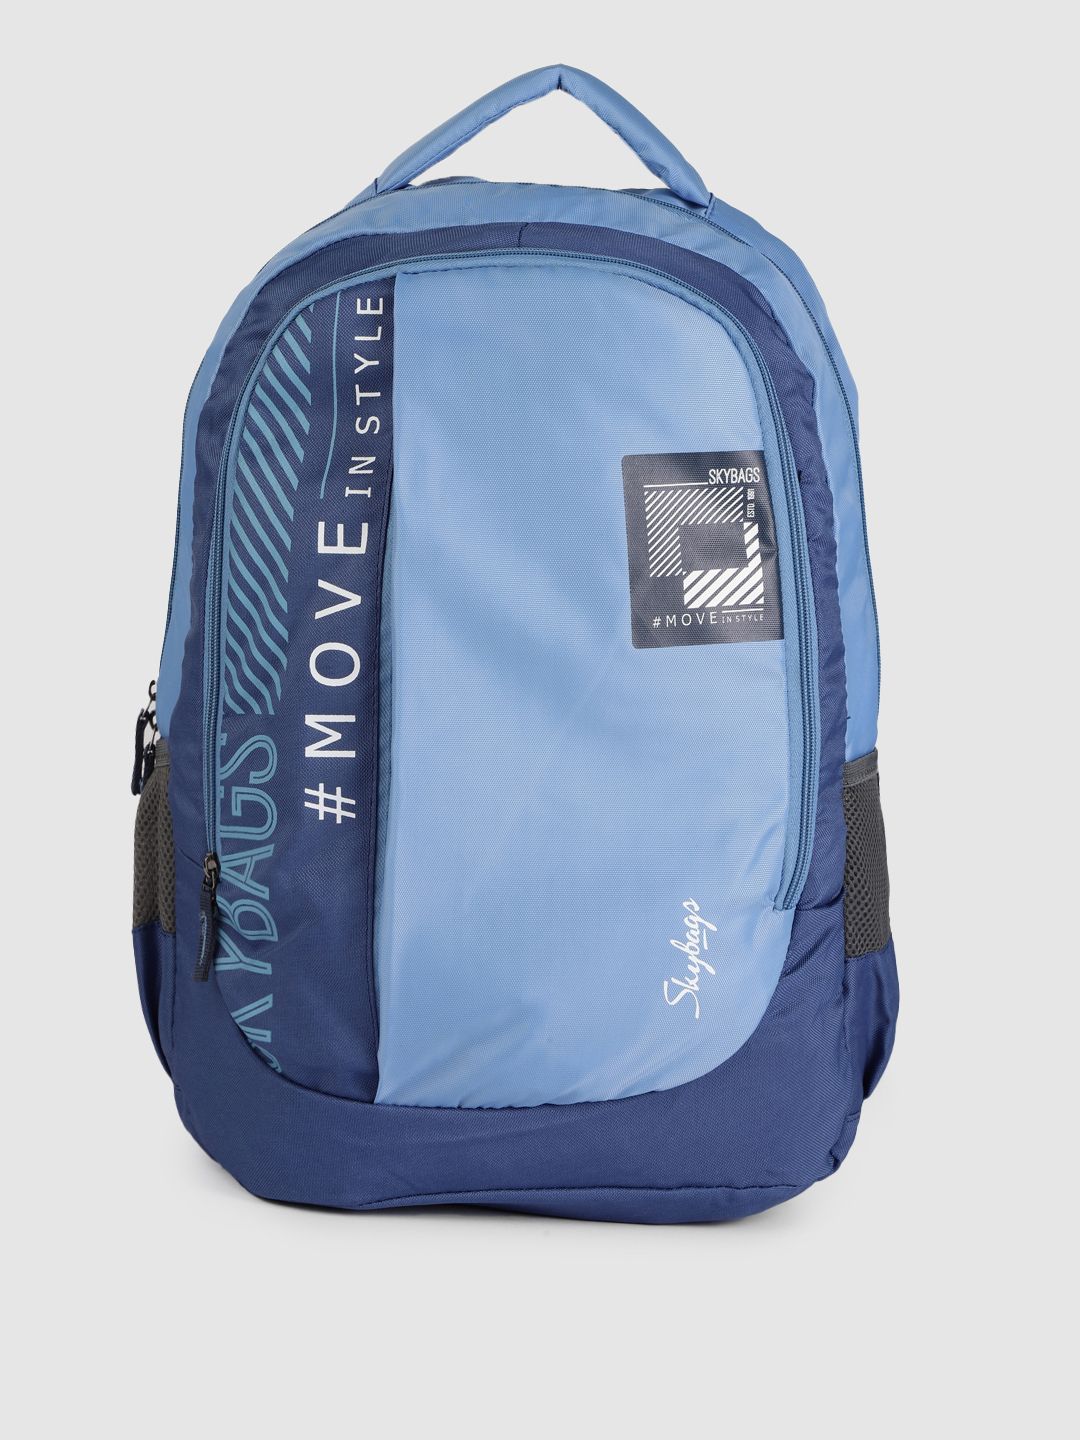 Skybags Blue Typography Backpack Price in India